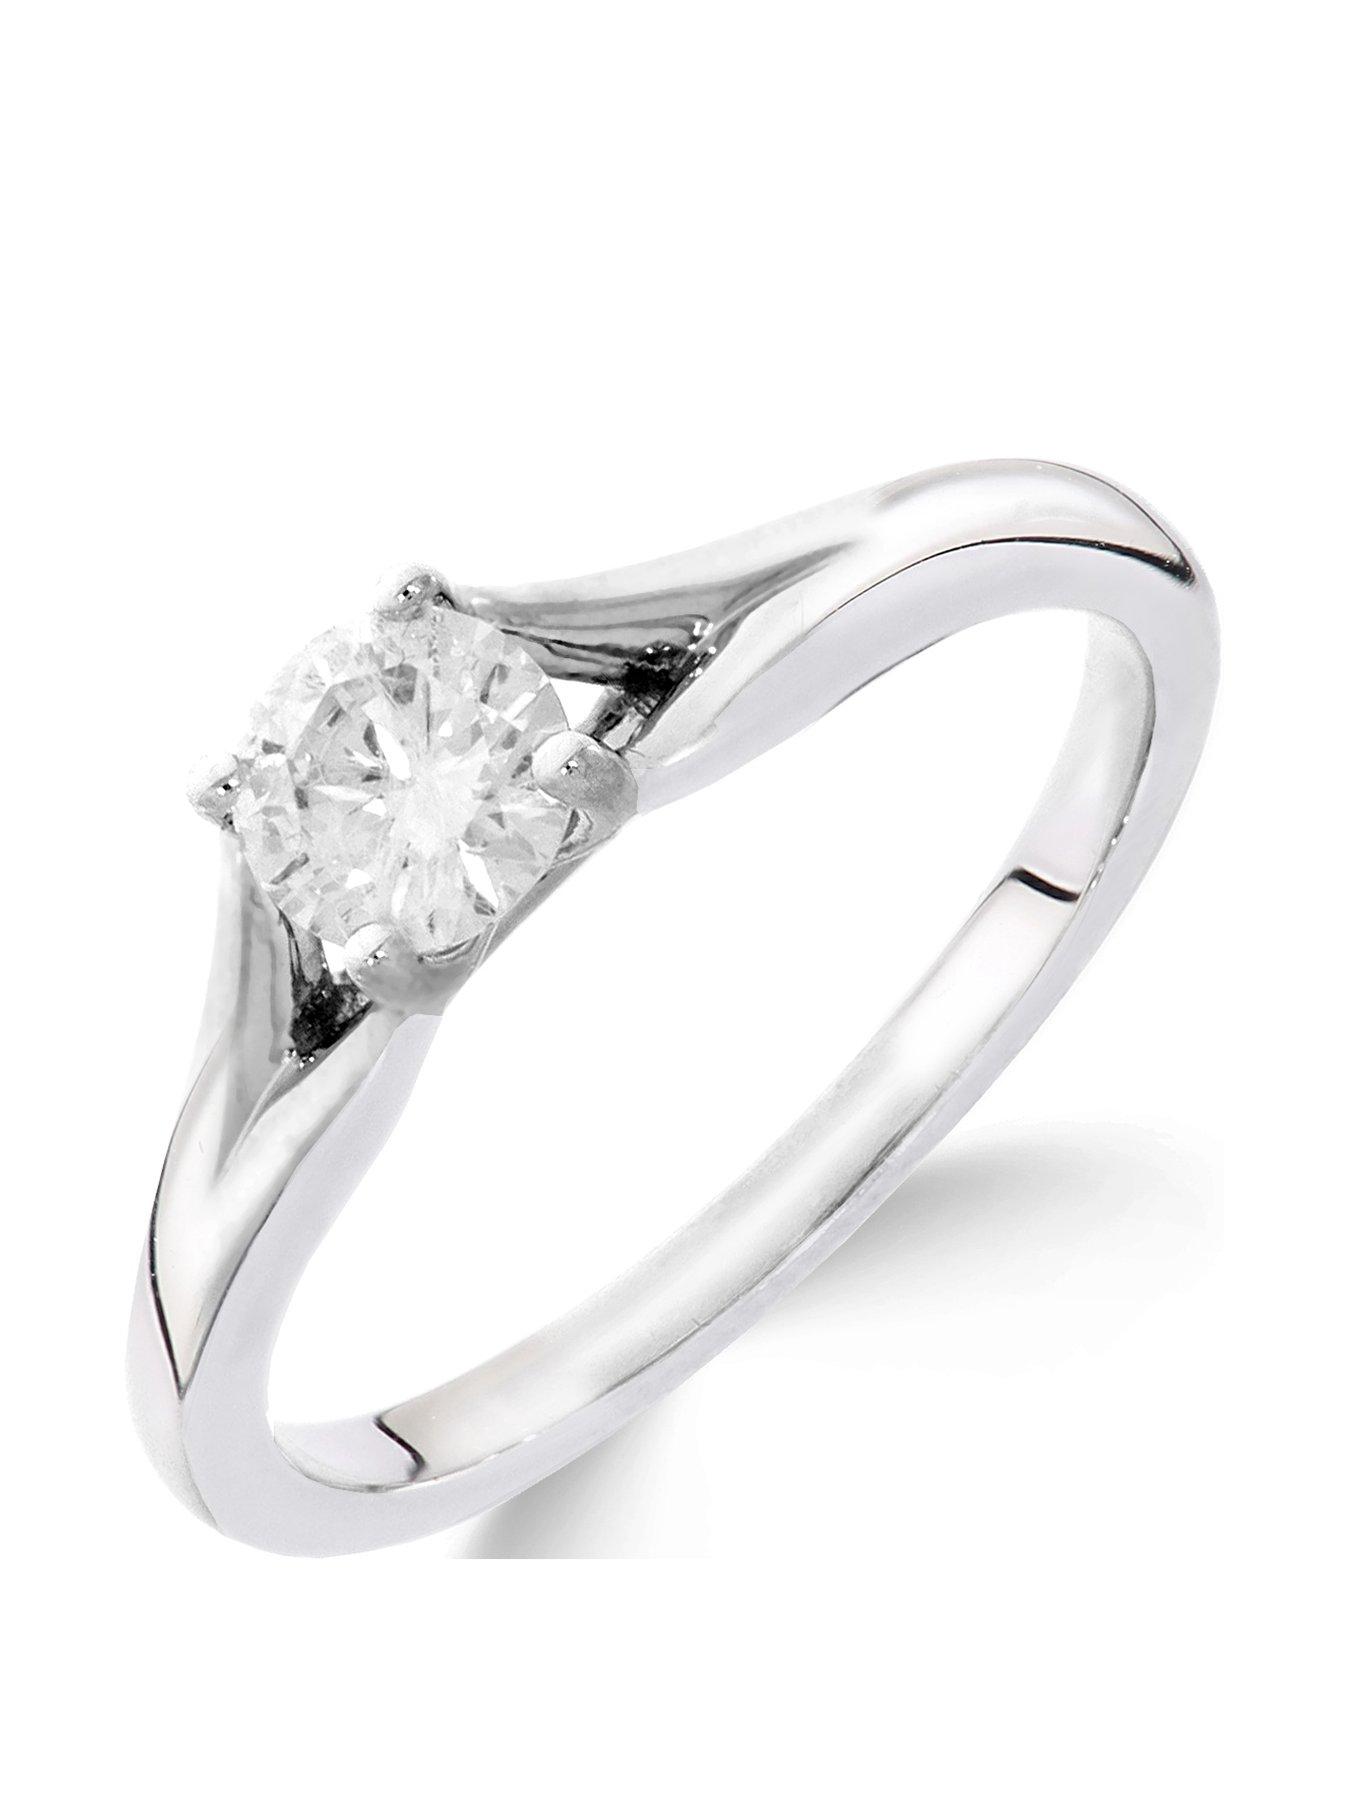 Women 9ct White Gold 1/2 Carat Diamond Solitaire with Tapered Shoulders Ring